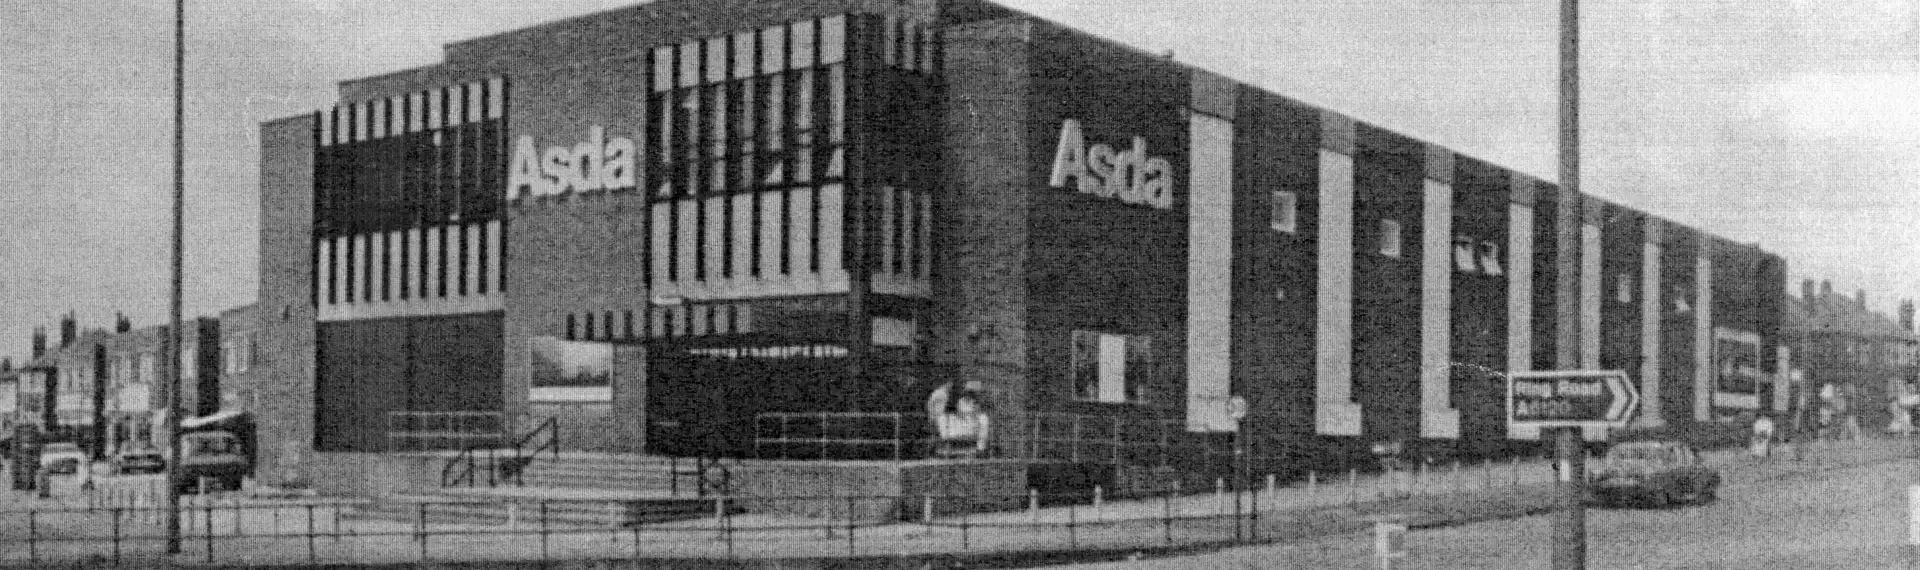 Black and white image of a two story brick building with ASDA logo on side and front